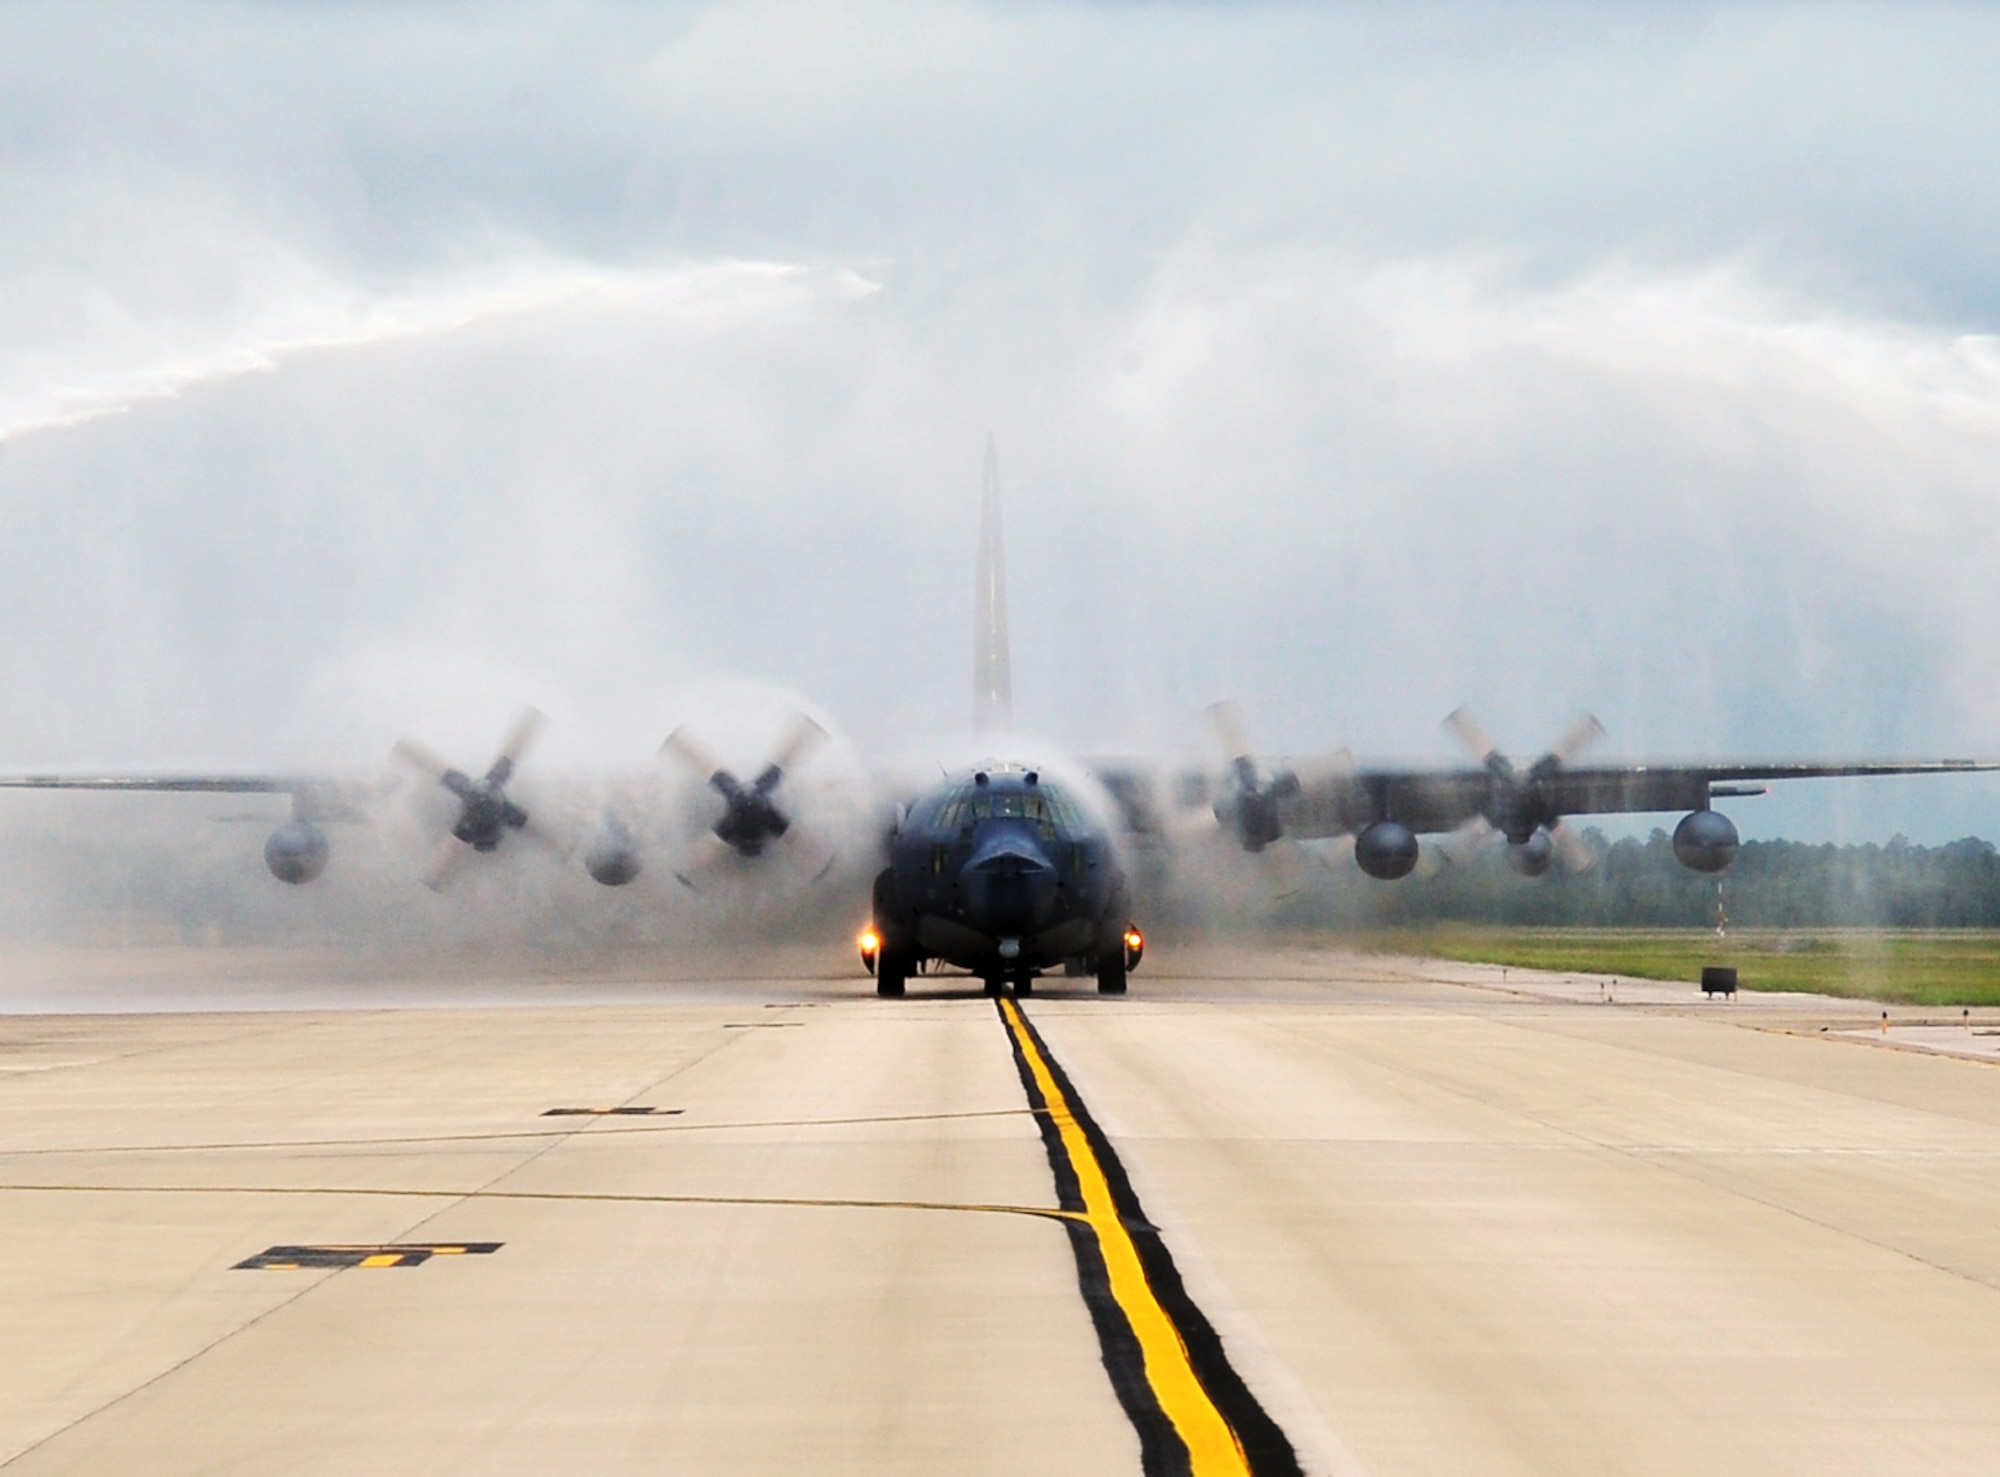 Fire trucks spray water over an MC-130P Combat Shadow after its final flight, May 15, 2015, at Hurlburt Field, Fla. Built with 1960s technology, the MC-130P began its special operations career in the mid-1980s and went on to conduct critical air refueling missions in the late 1980s during Operation Just Cause in Panama and the early 1990s during Operation Desert Storm. (U.S. Air Force photo/Airman 1st Class Ryan Conroy) 